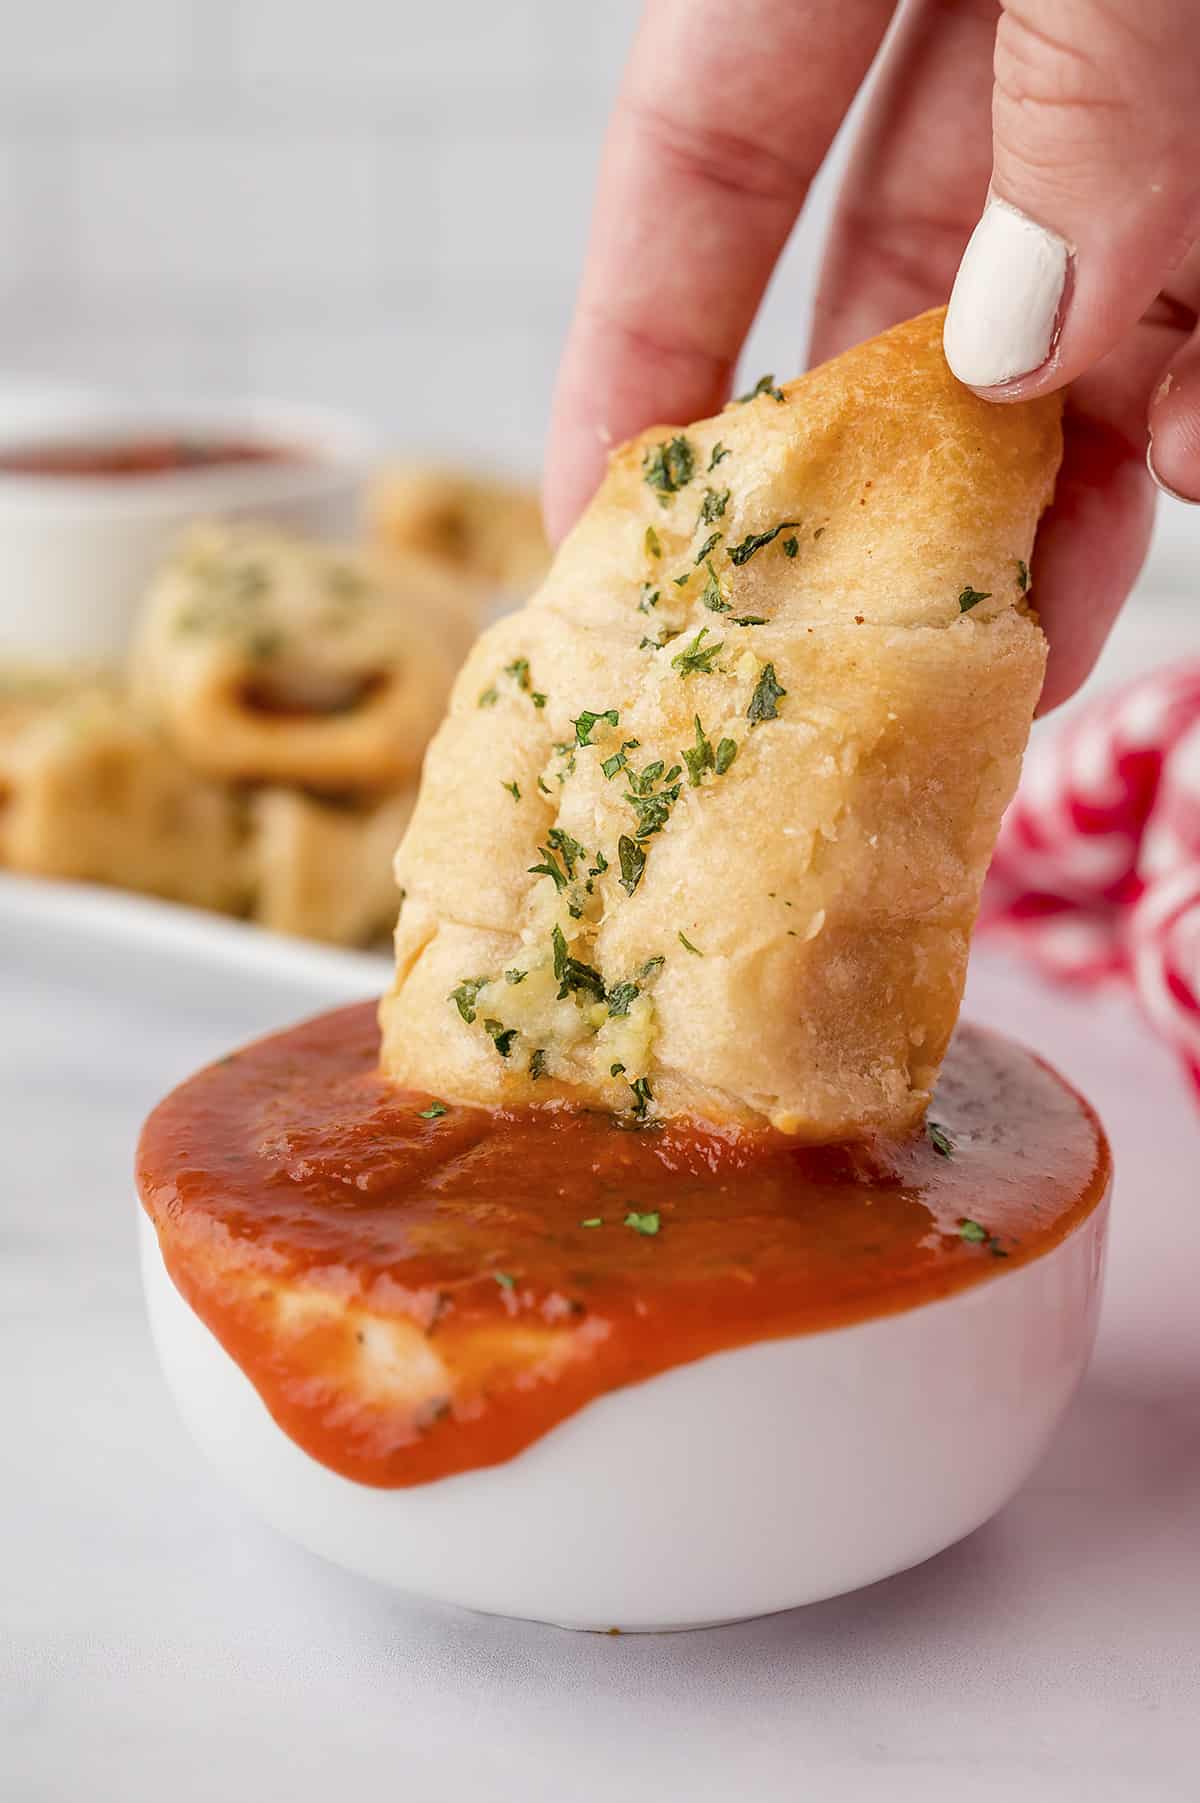 Homemade pizza rolls with pizza sauce, mozzarella, and pepperoni!